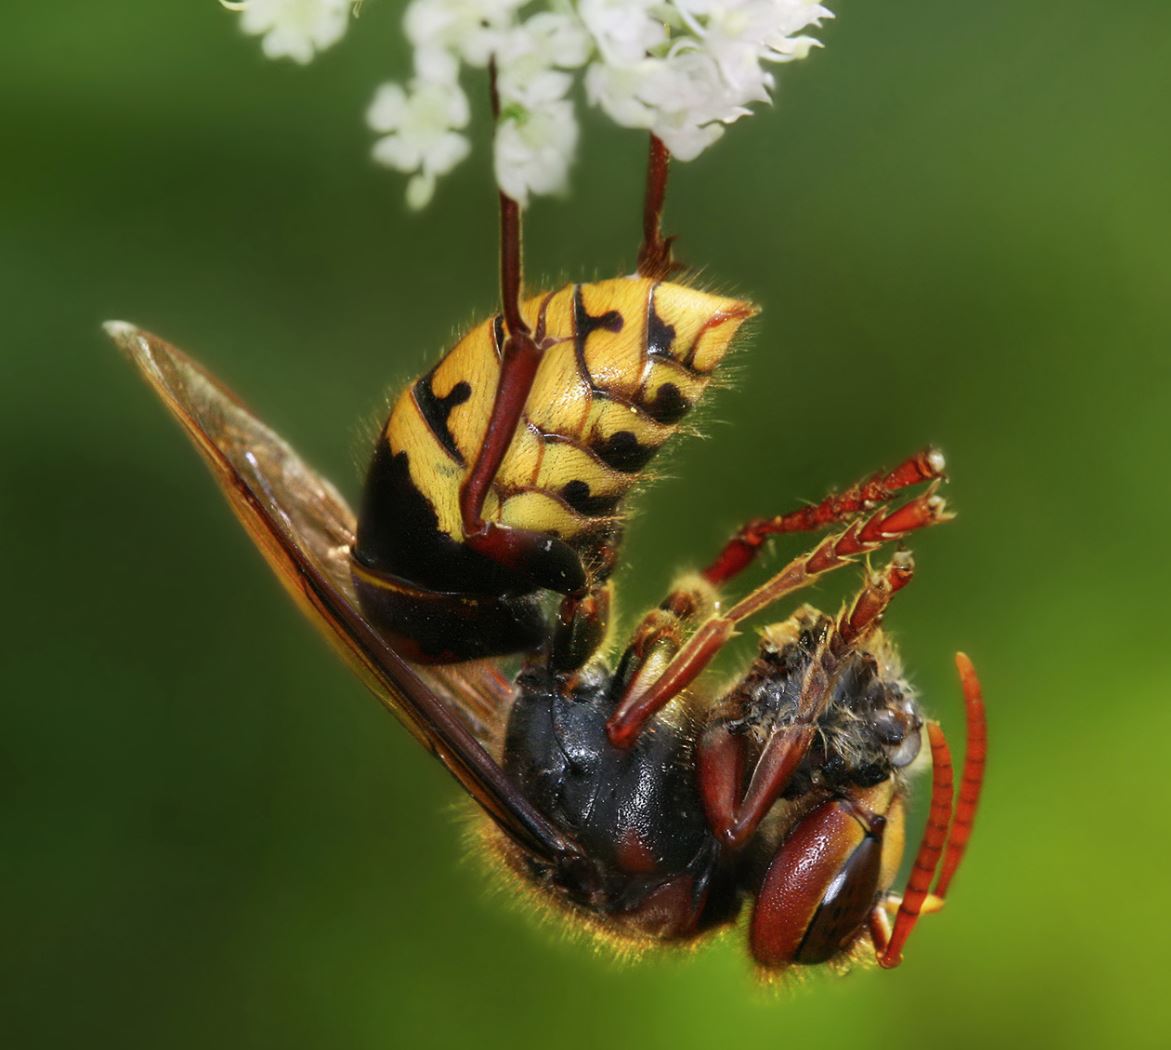 A bee with pollen on its legs